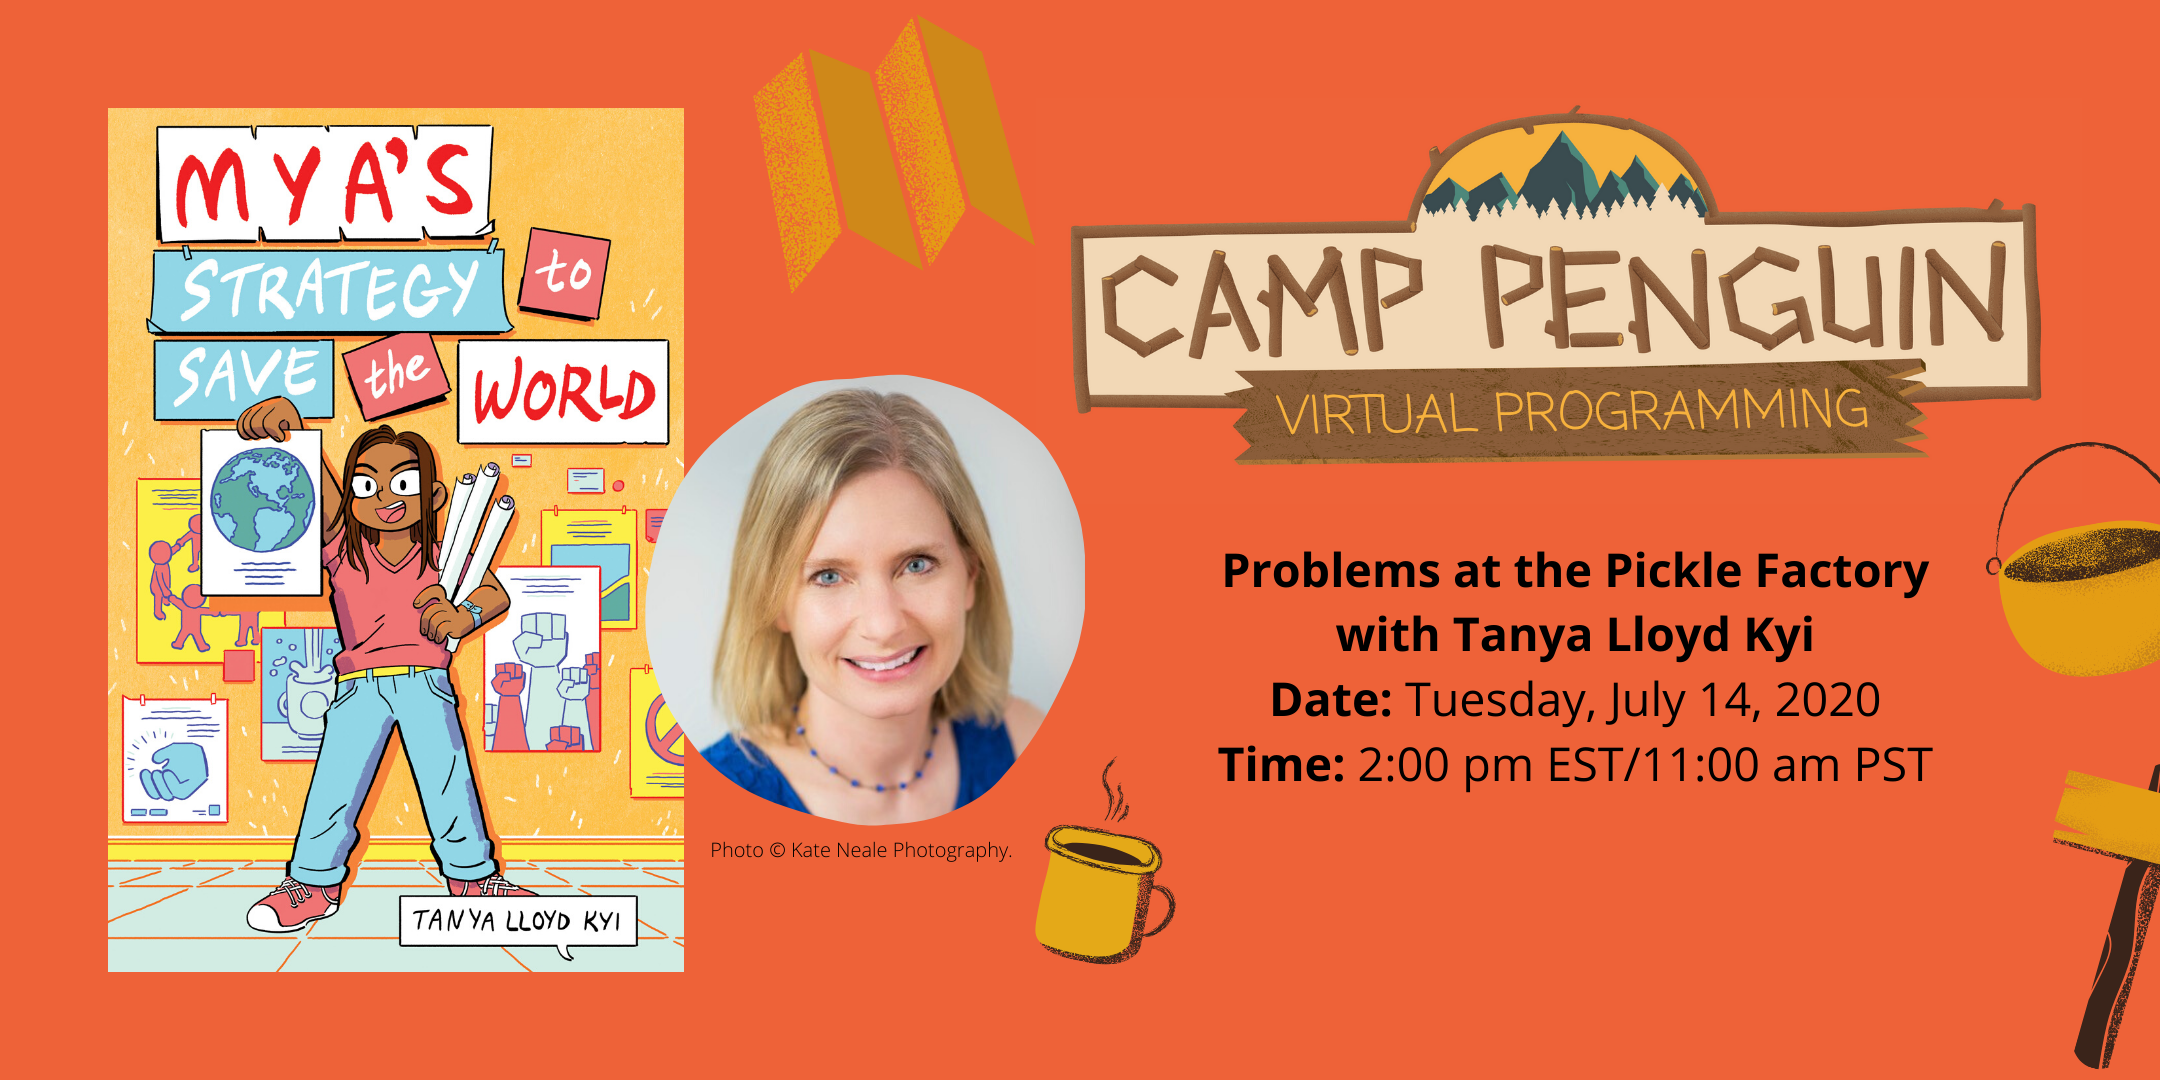 Camp Penguin: Problems at the Pickle Factory with TANYA LLOYD KYI